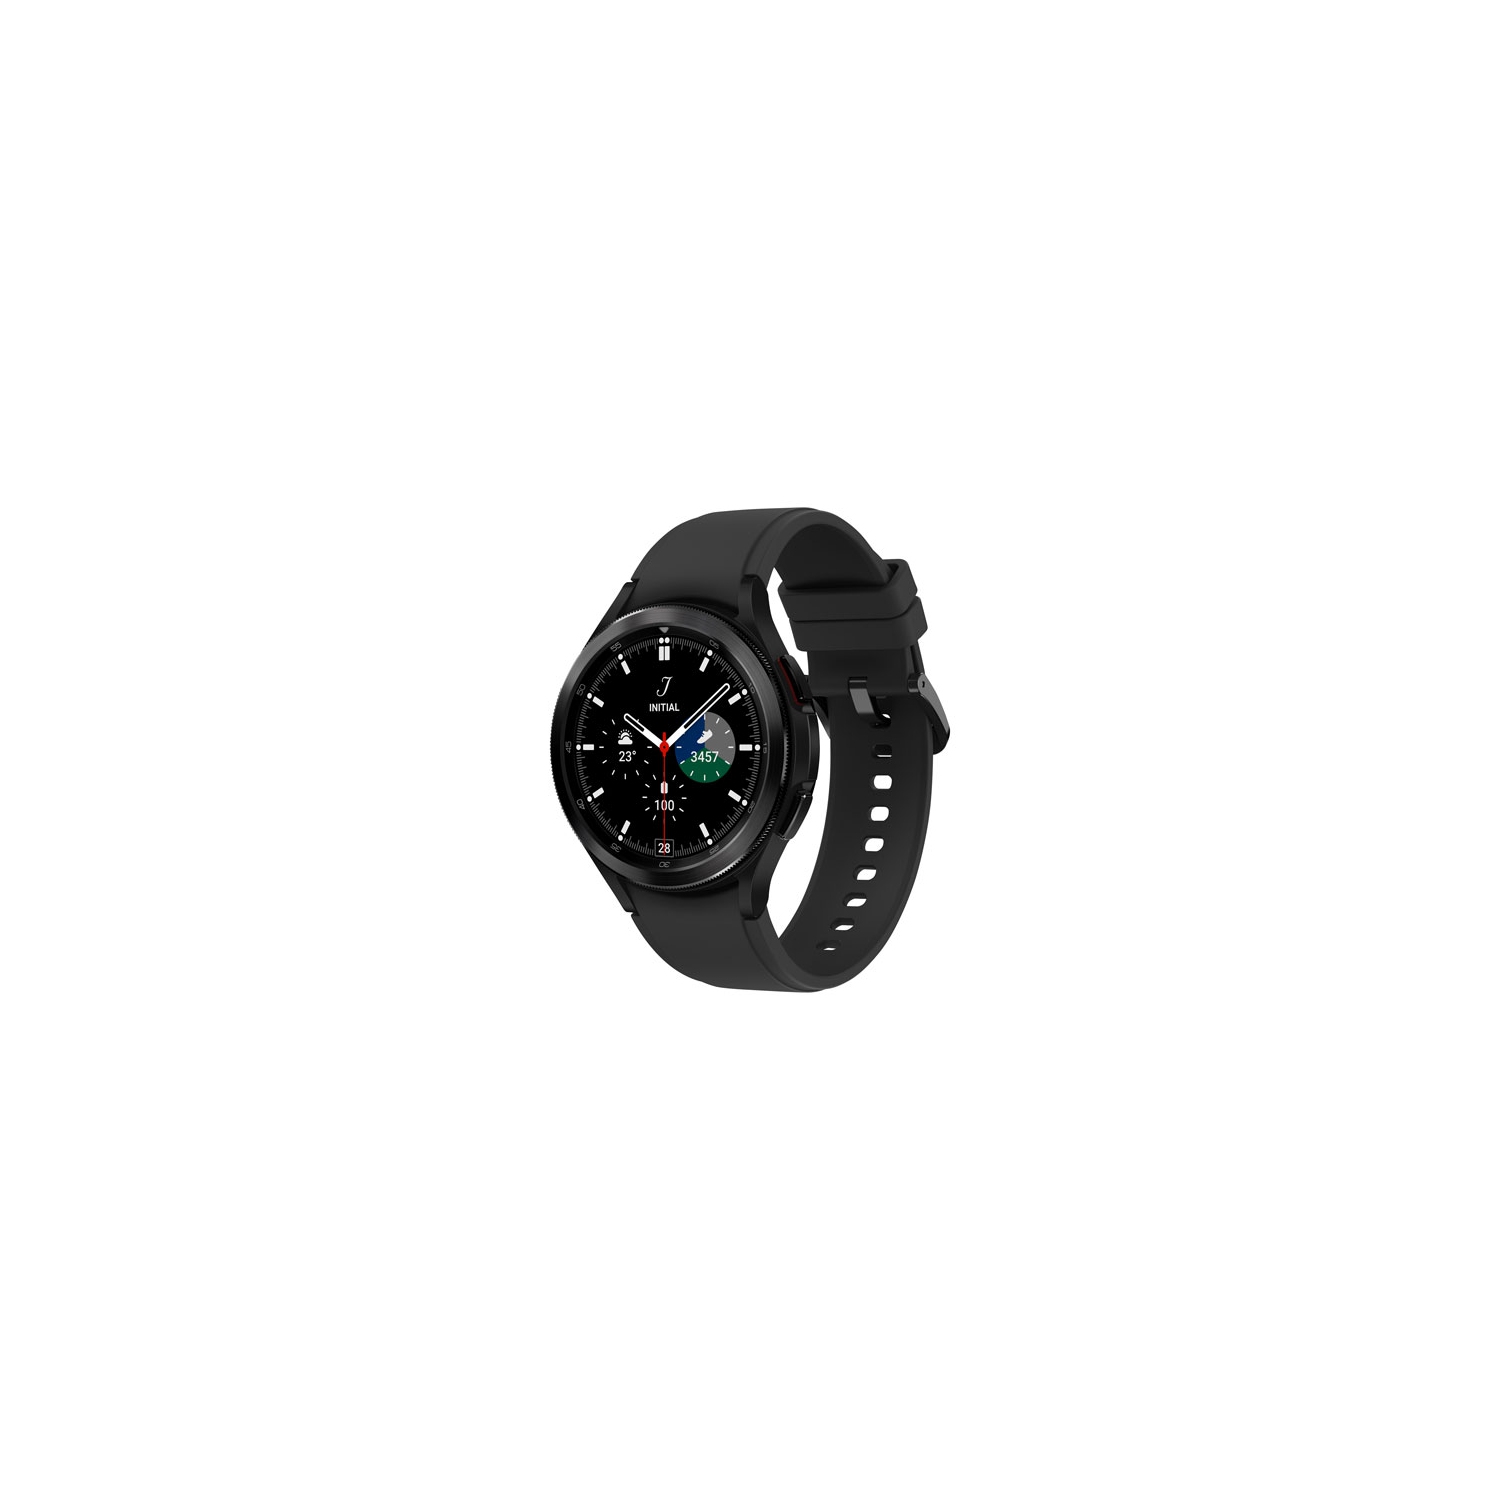 Refurbished (Good) - Samsung Galaxy Watch4 Classic 46mm Smartwatch with Heart Rate Monitor - Black